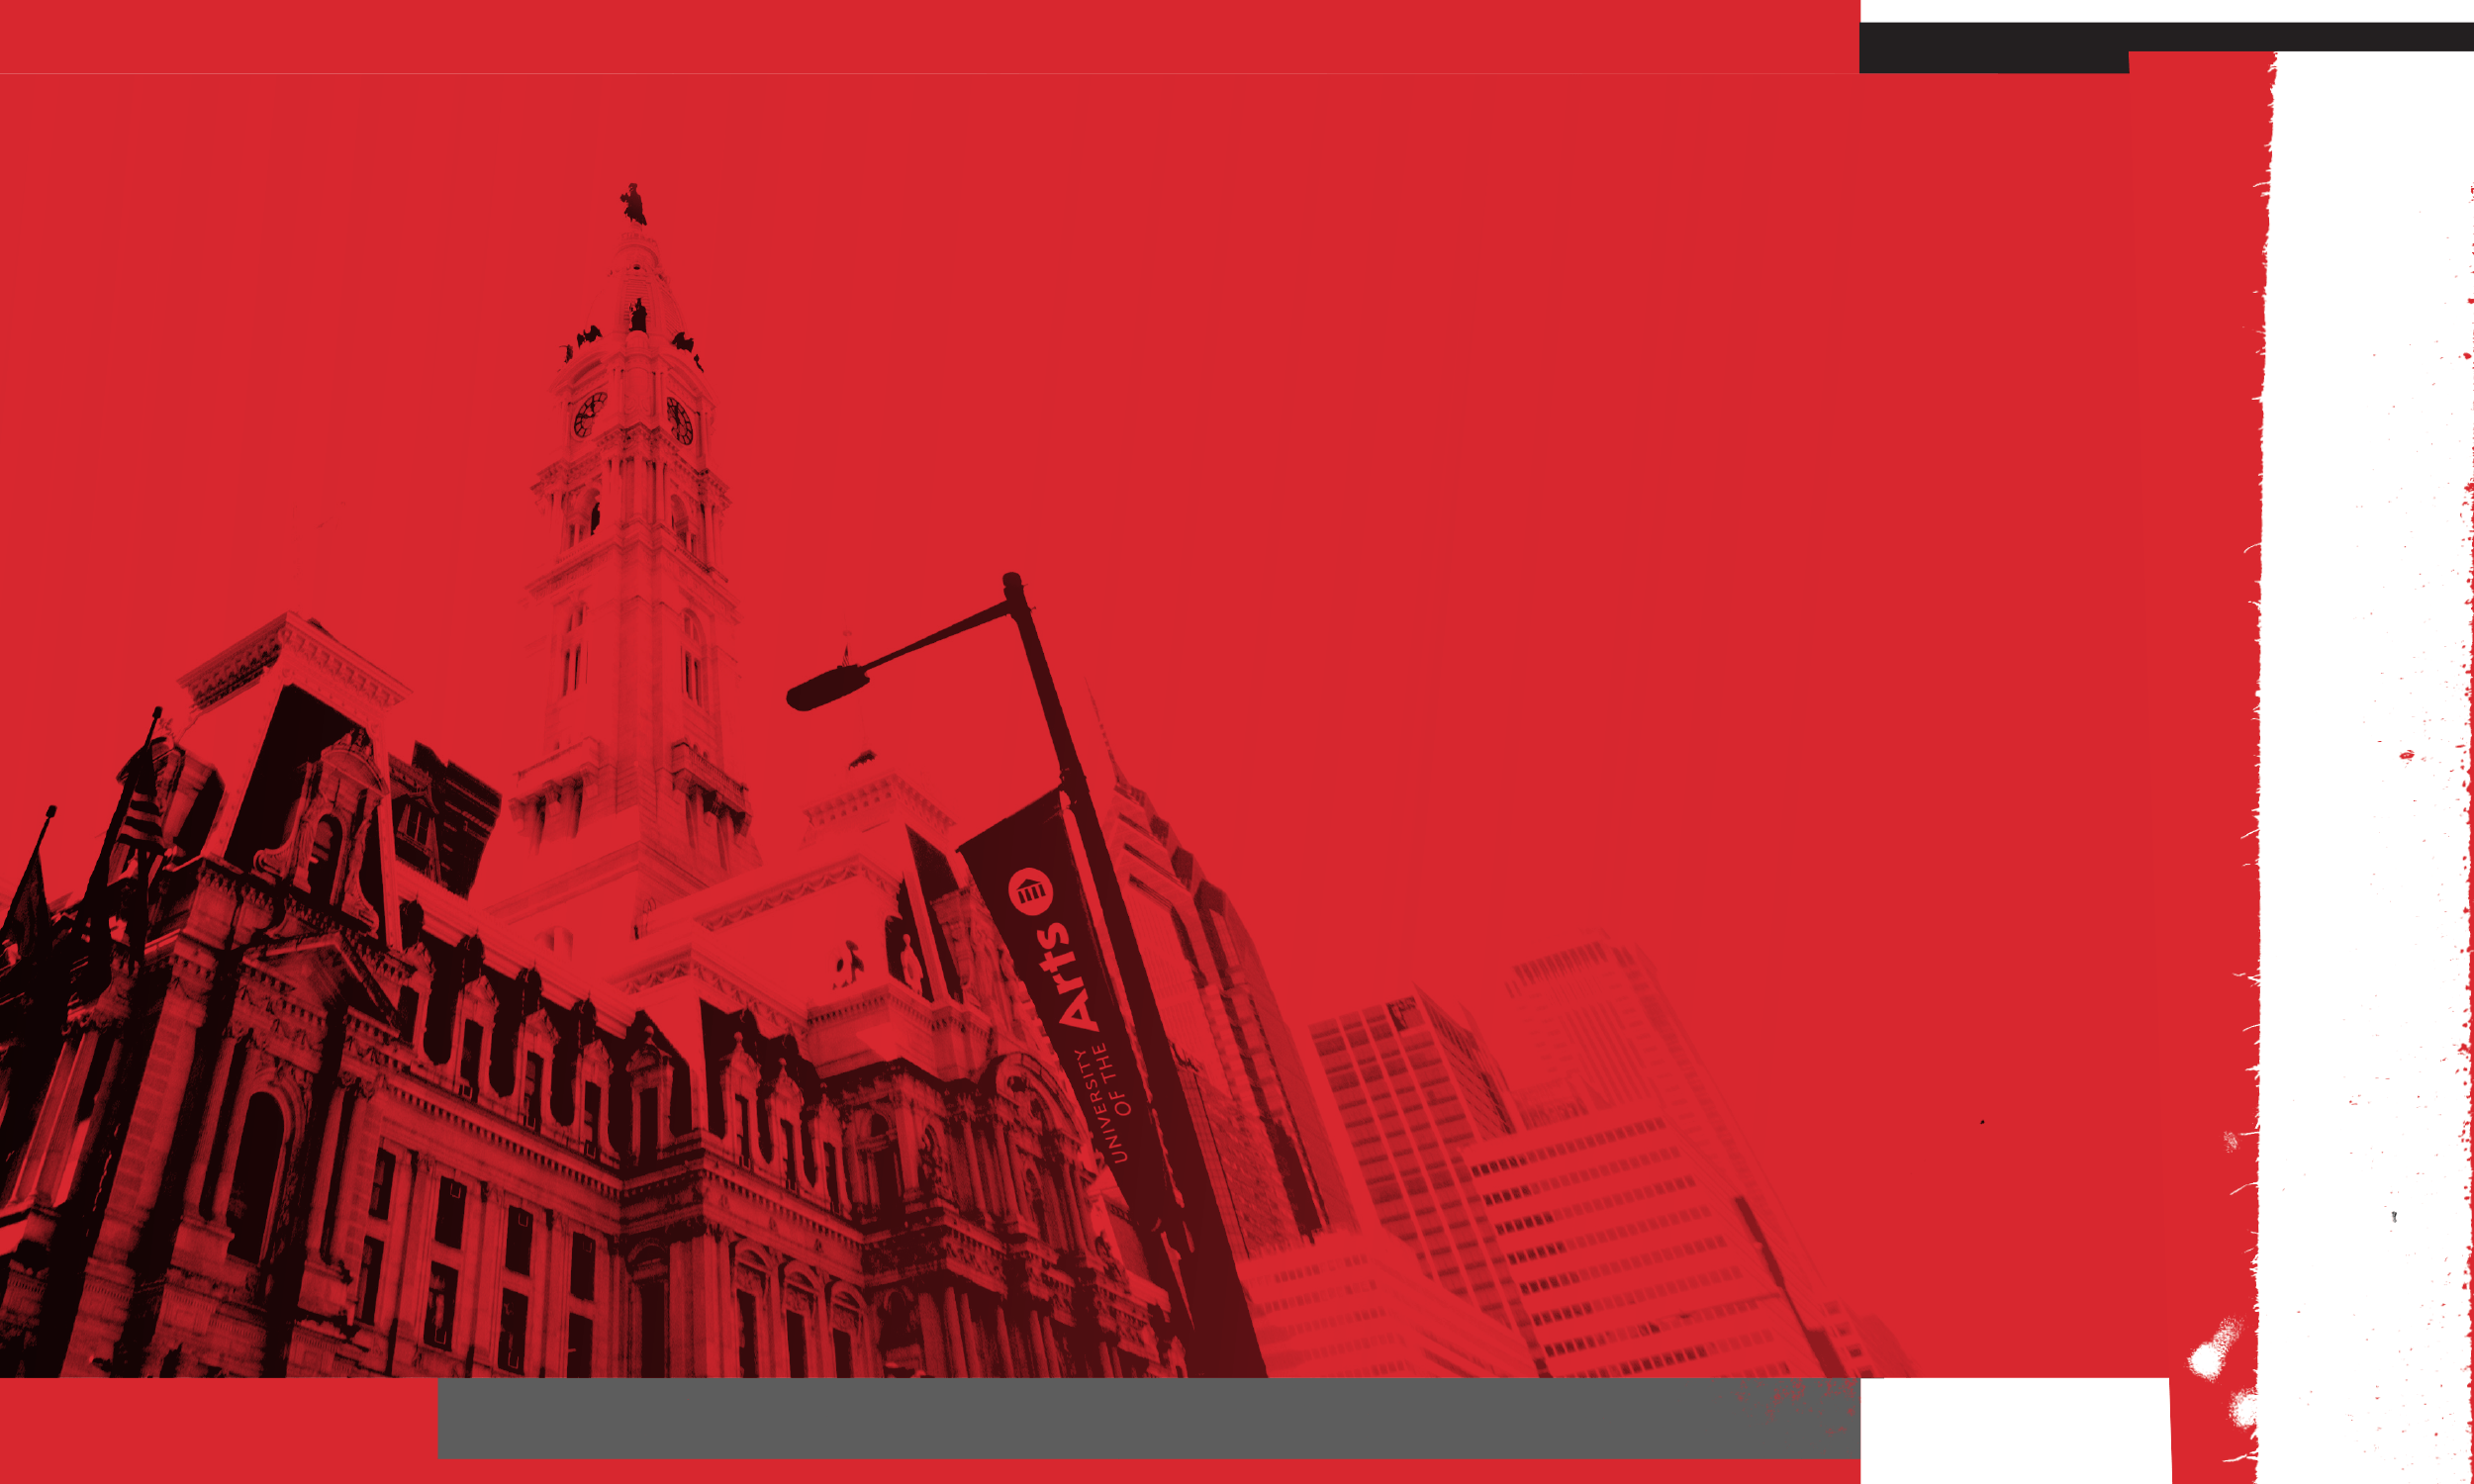 A graphic image of City Hall in Philadelphia treated with red saturation.